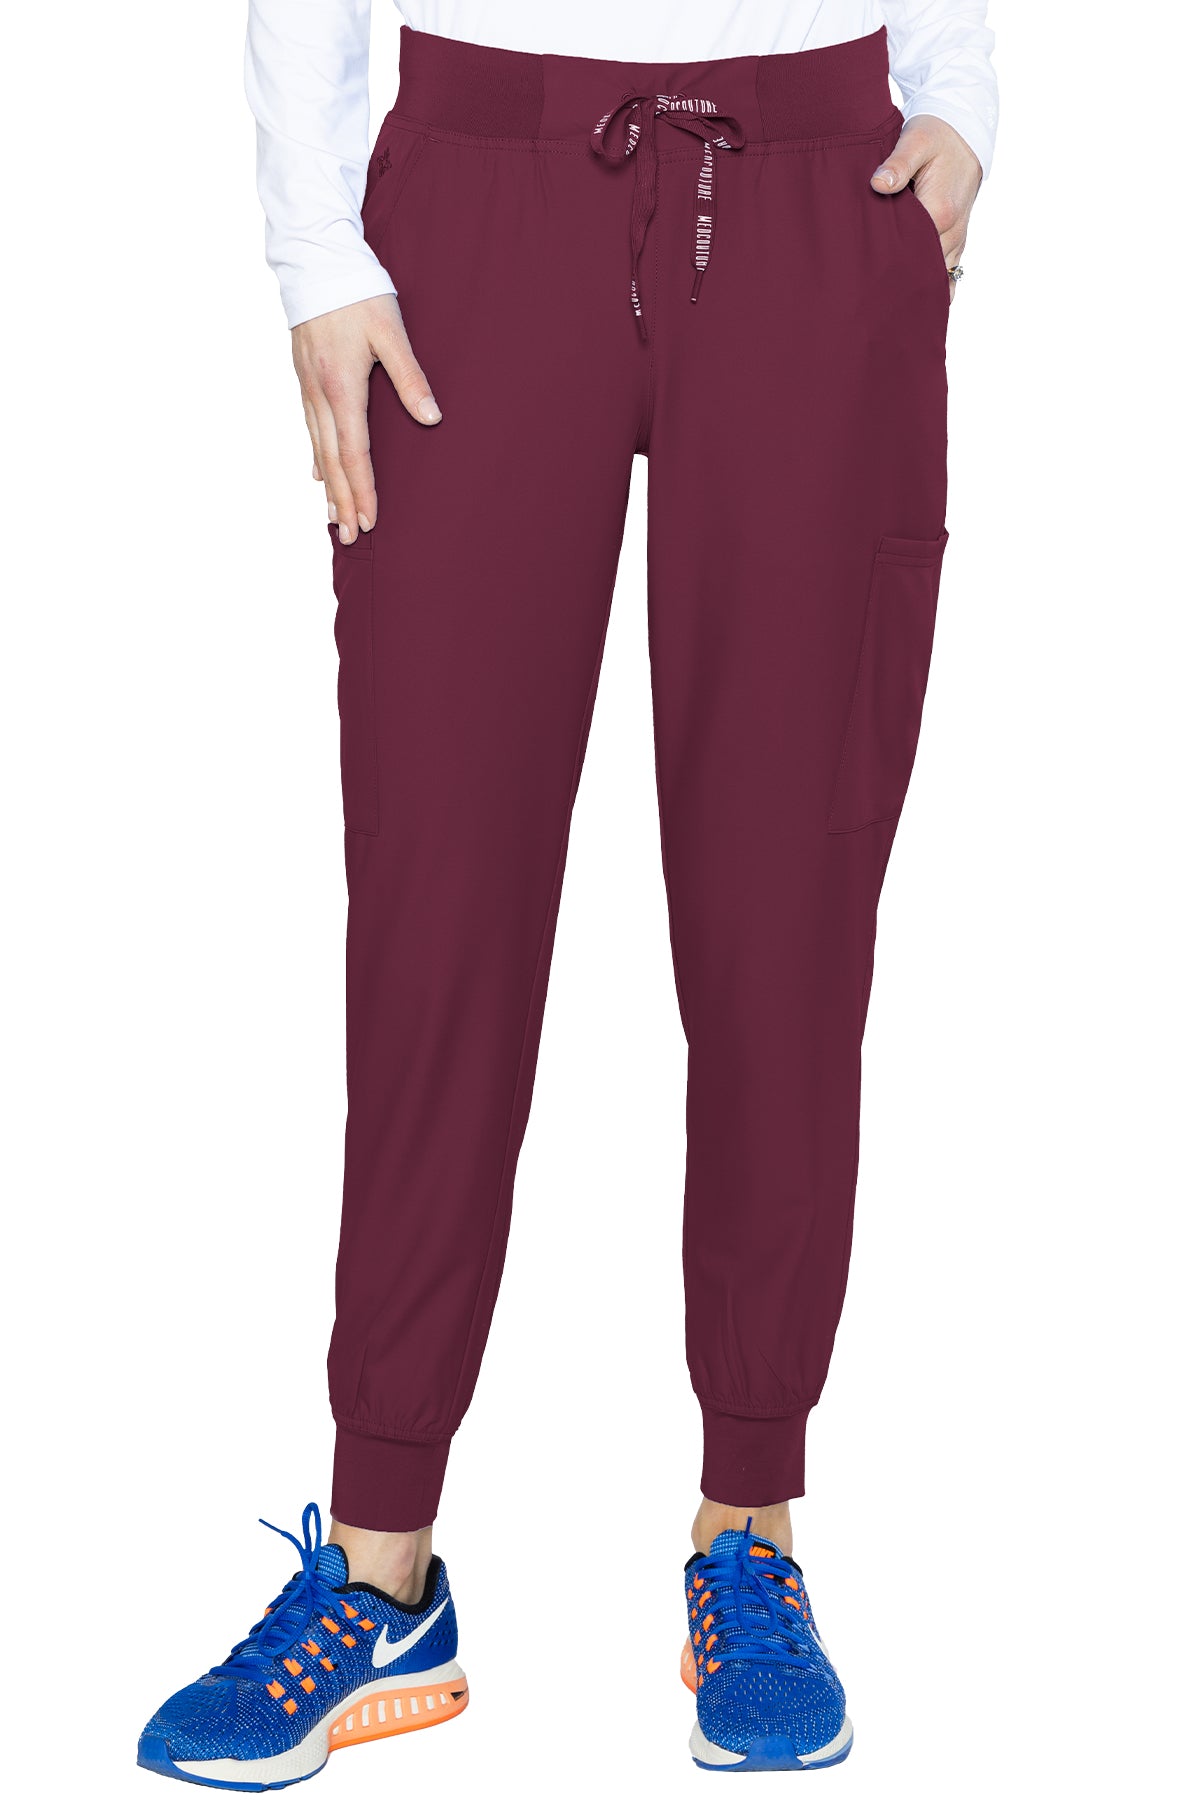 2711 Med Couture Insight Women's Jogger